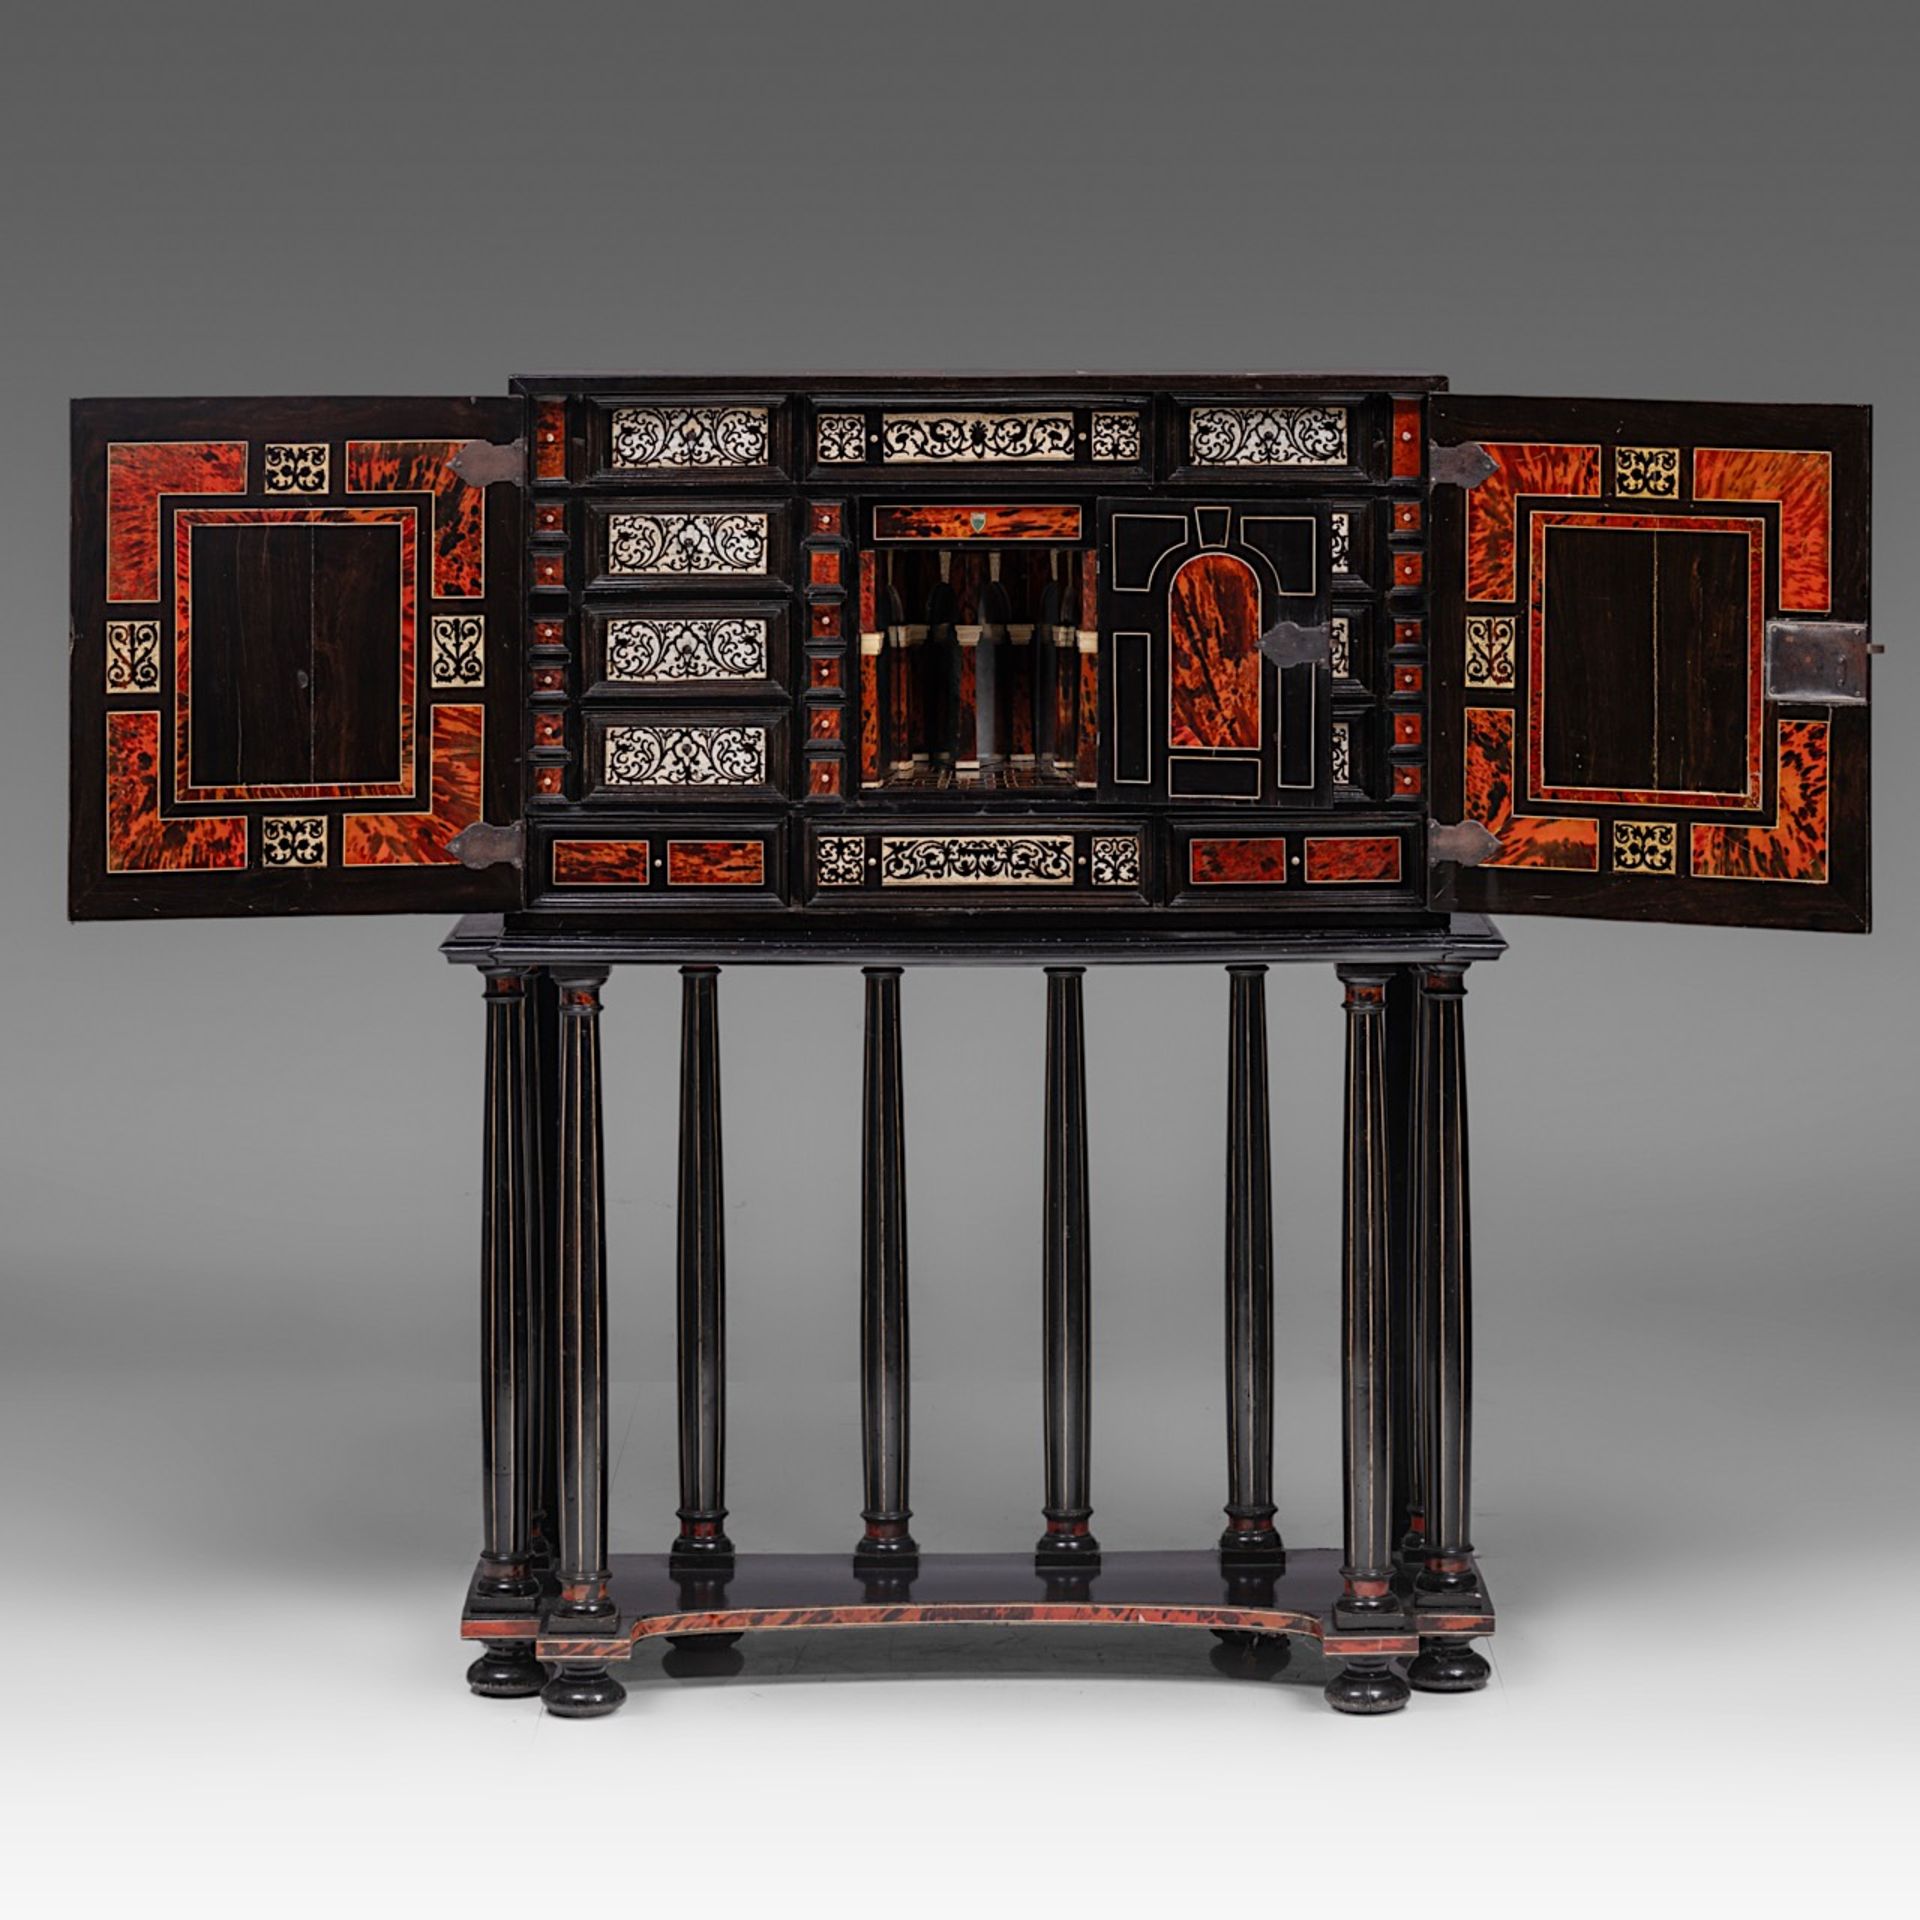 A 17thC Flemish Antwerp ebony, ivory and tortoiseshell cabinet-on-stand, H 137 cm (total) (+) - Image 5 of 9